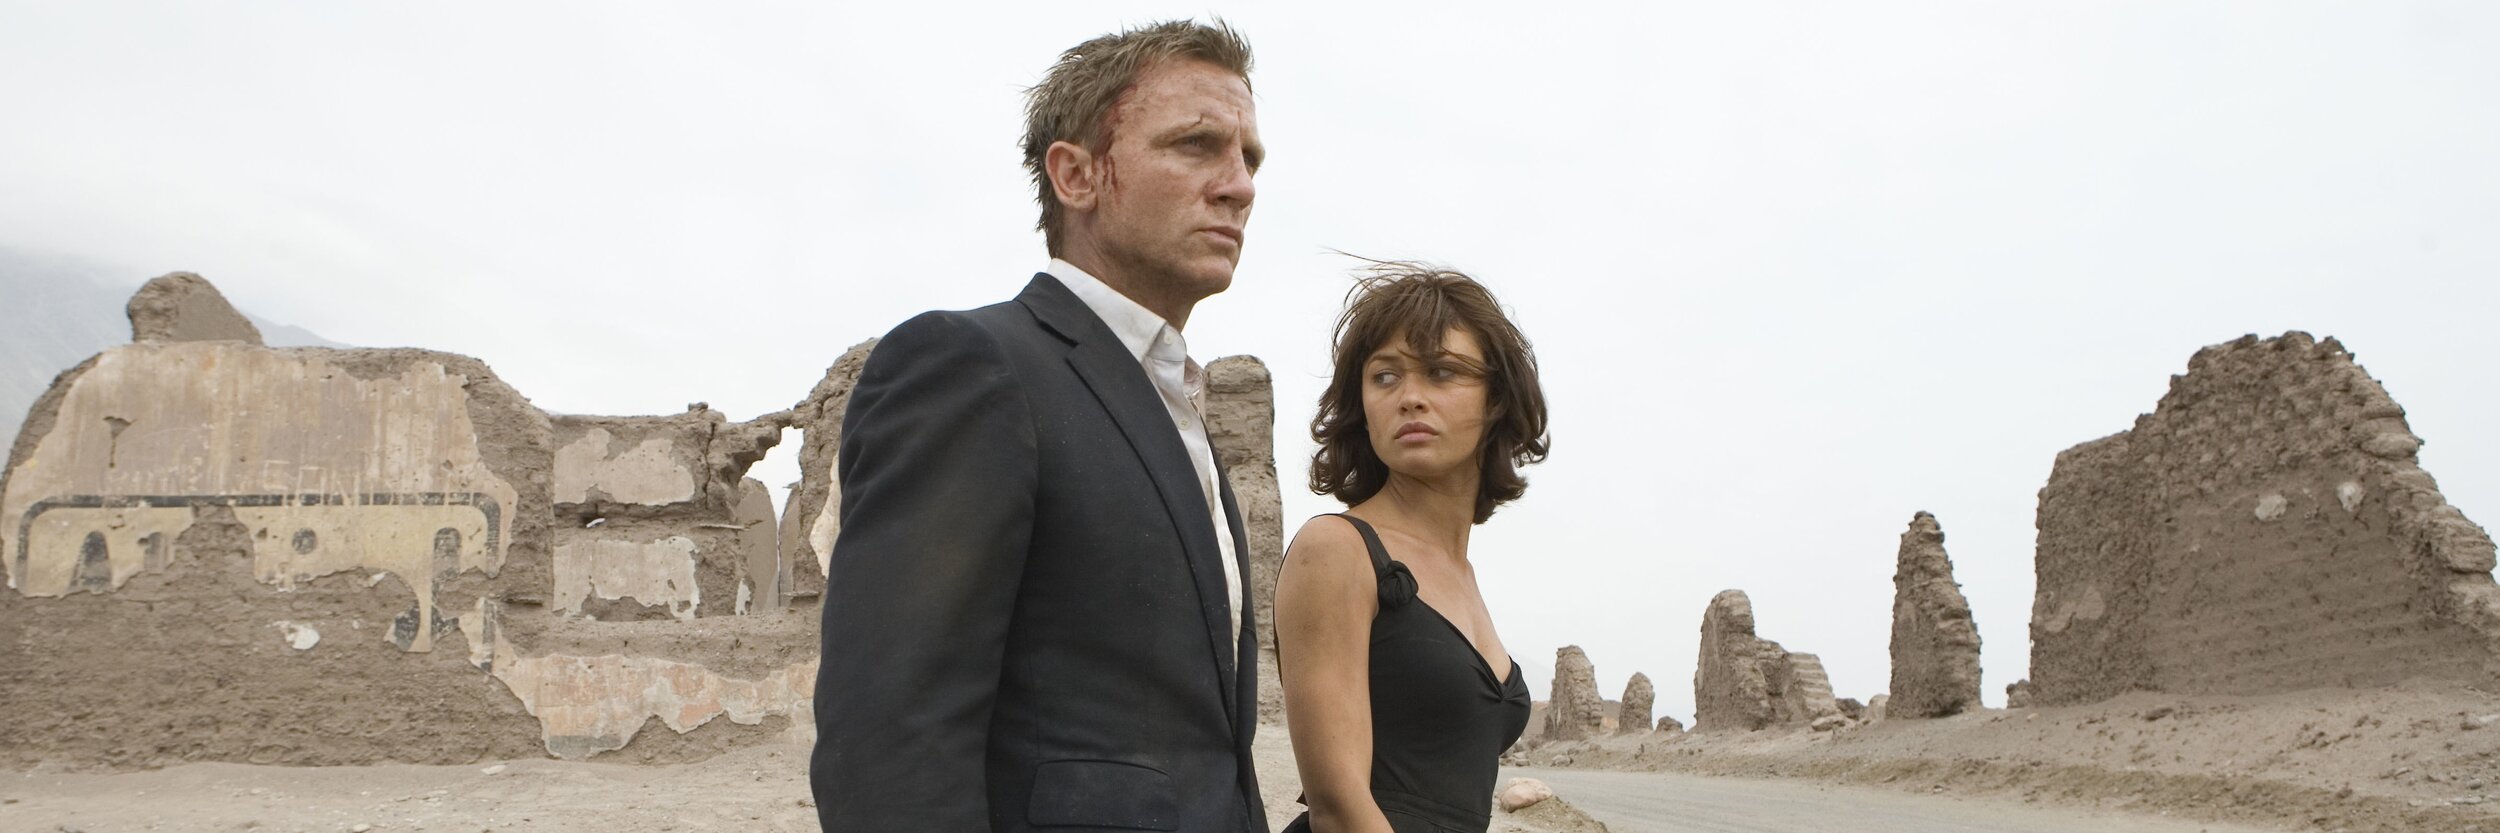 Quantum of Solace (2008) - SPOILER-FREE Review